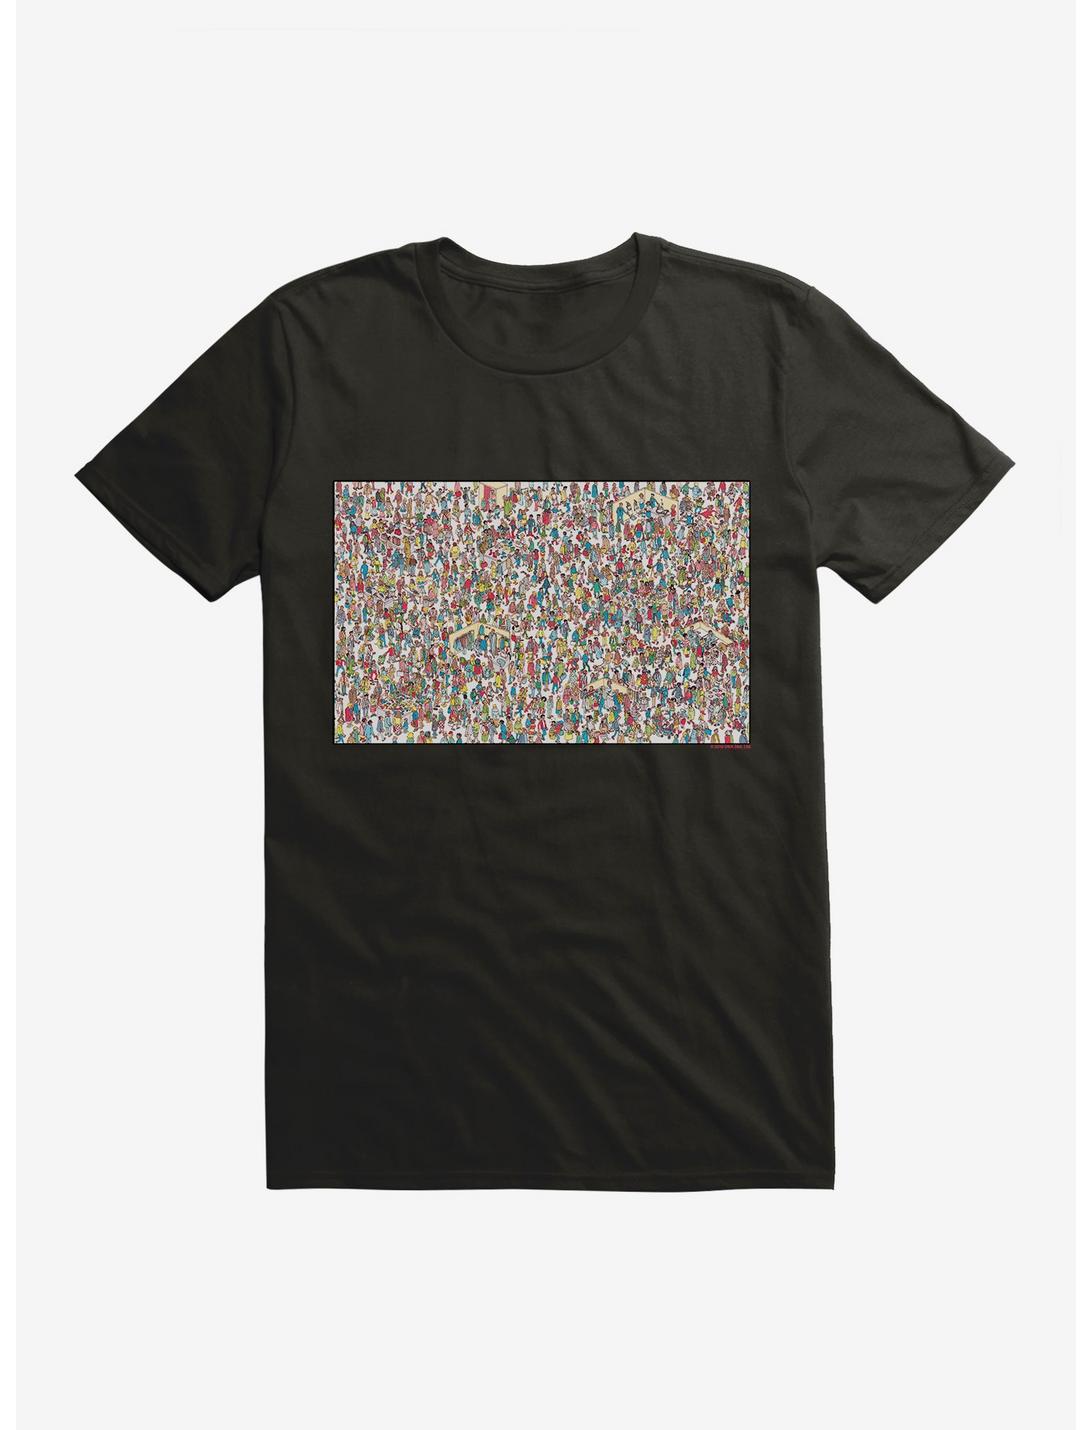 Where's Waldo? Search The Department Store T-Shirt, BLACK, hi-res